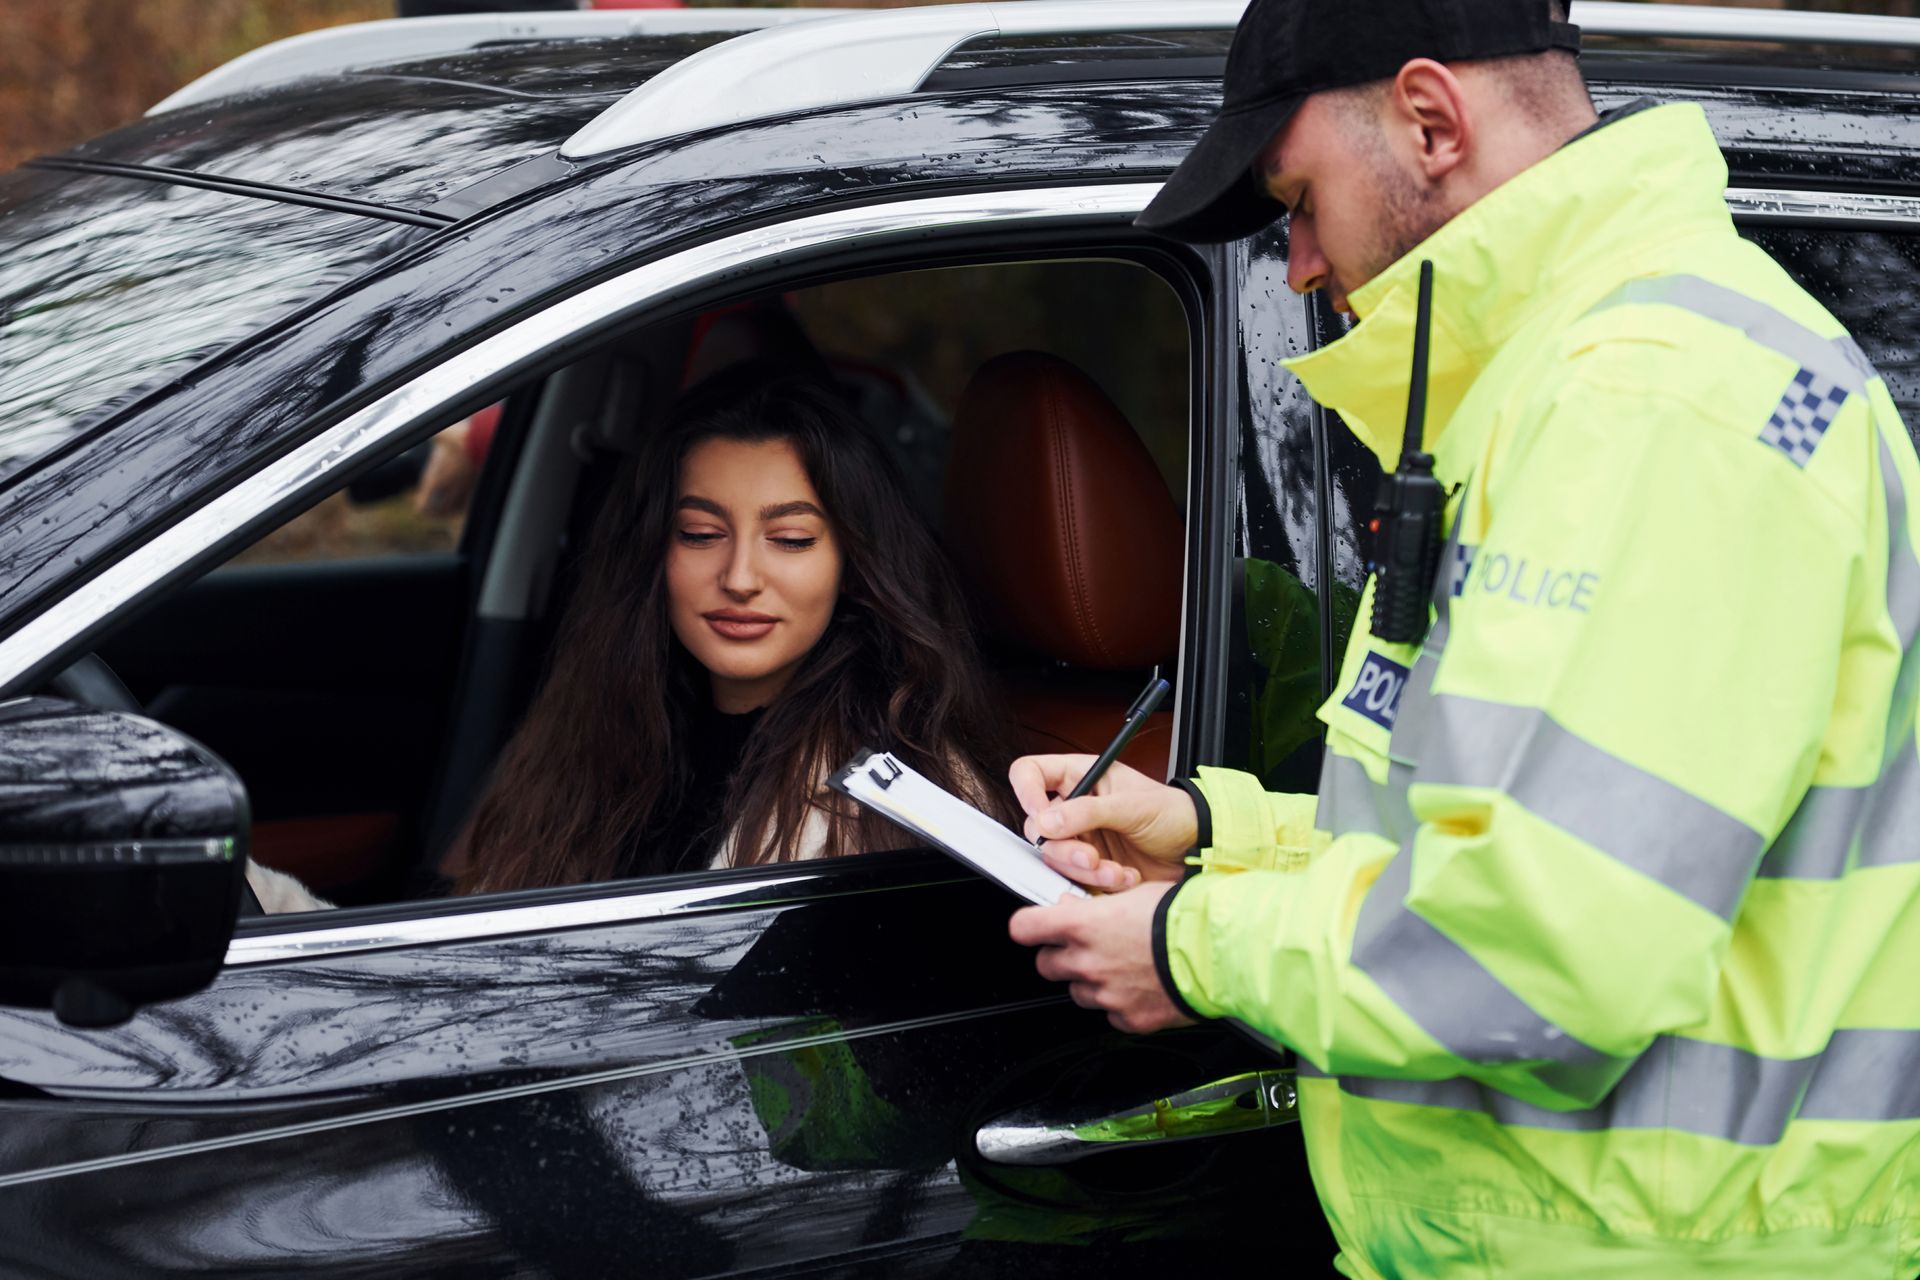 A police officer is writing a ticket to a woman in a car.